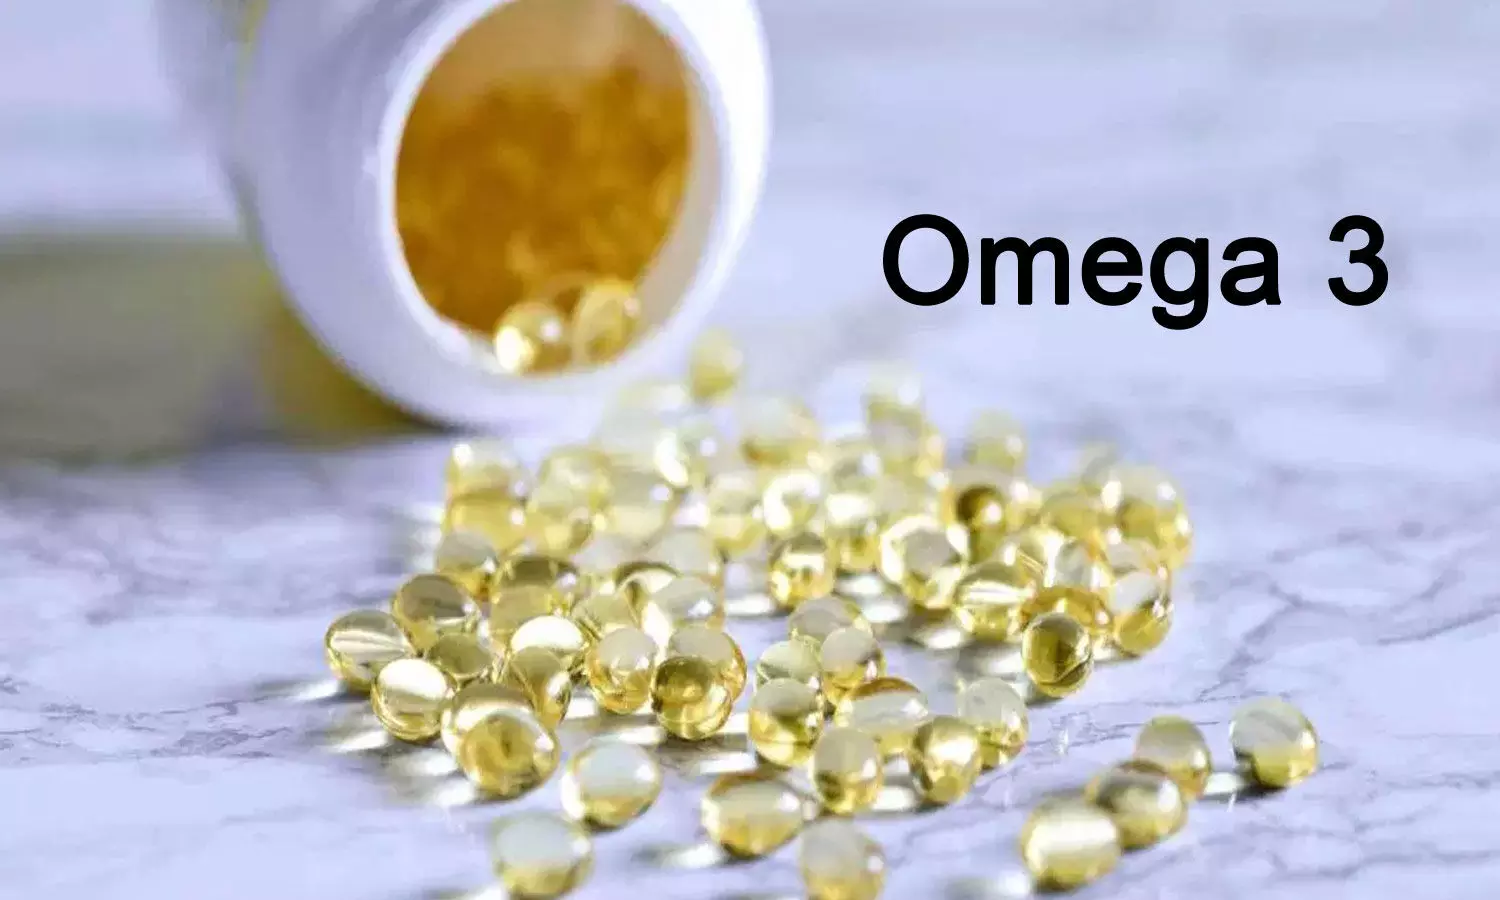 Omega-3 and polyphenol supplements during pregnancy improve offspring growth: Study